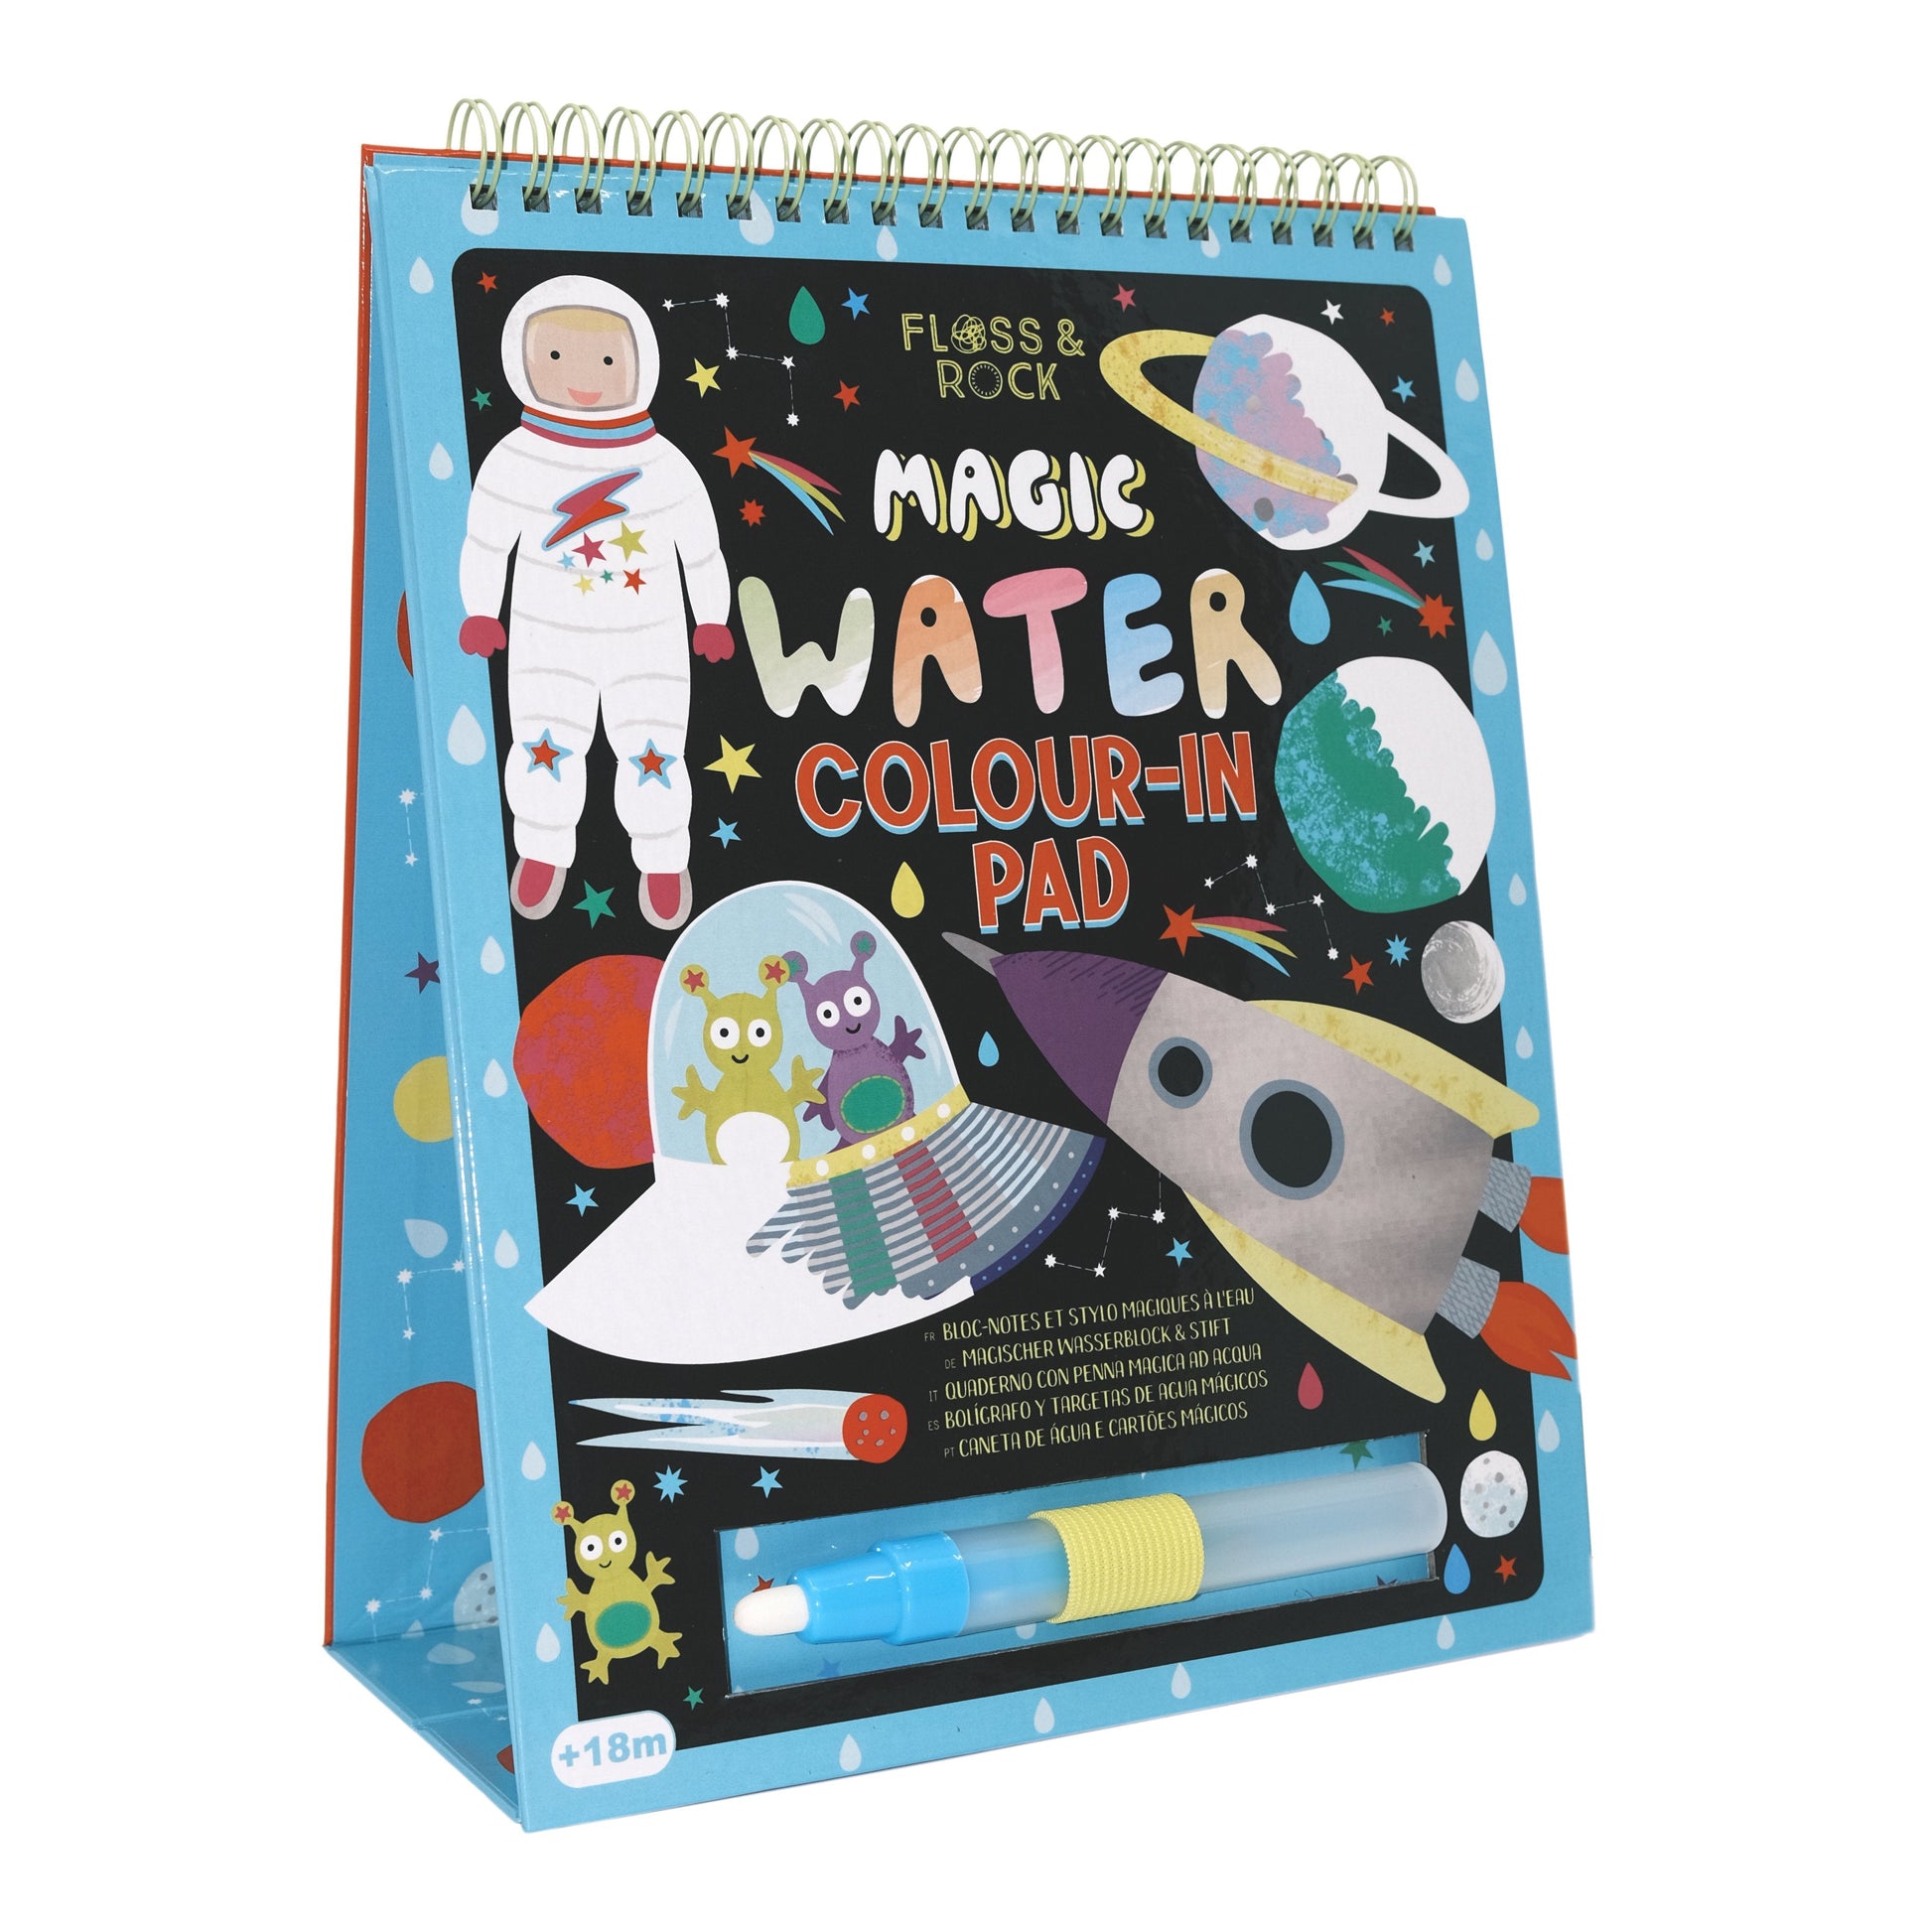 Floss & Rock Magic Colour Changing Watercard Easel and Pen